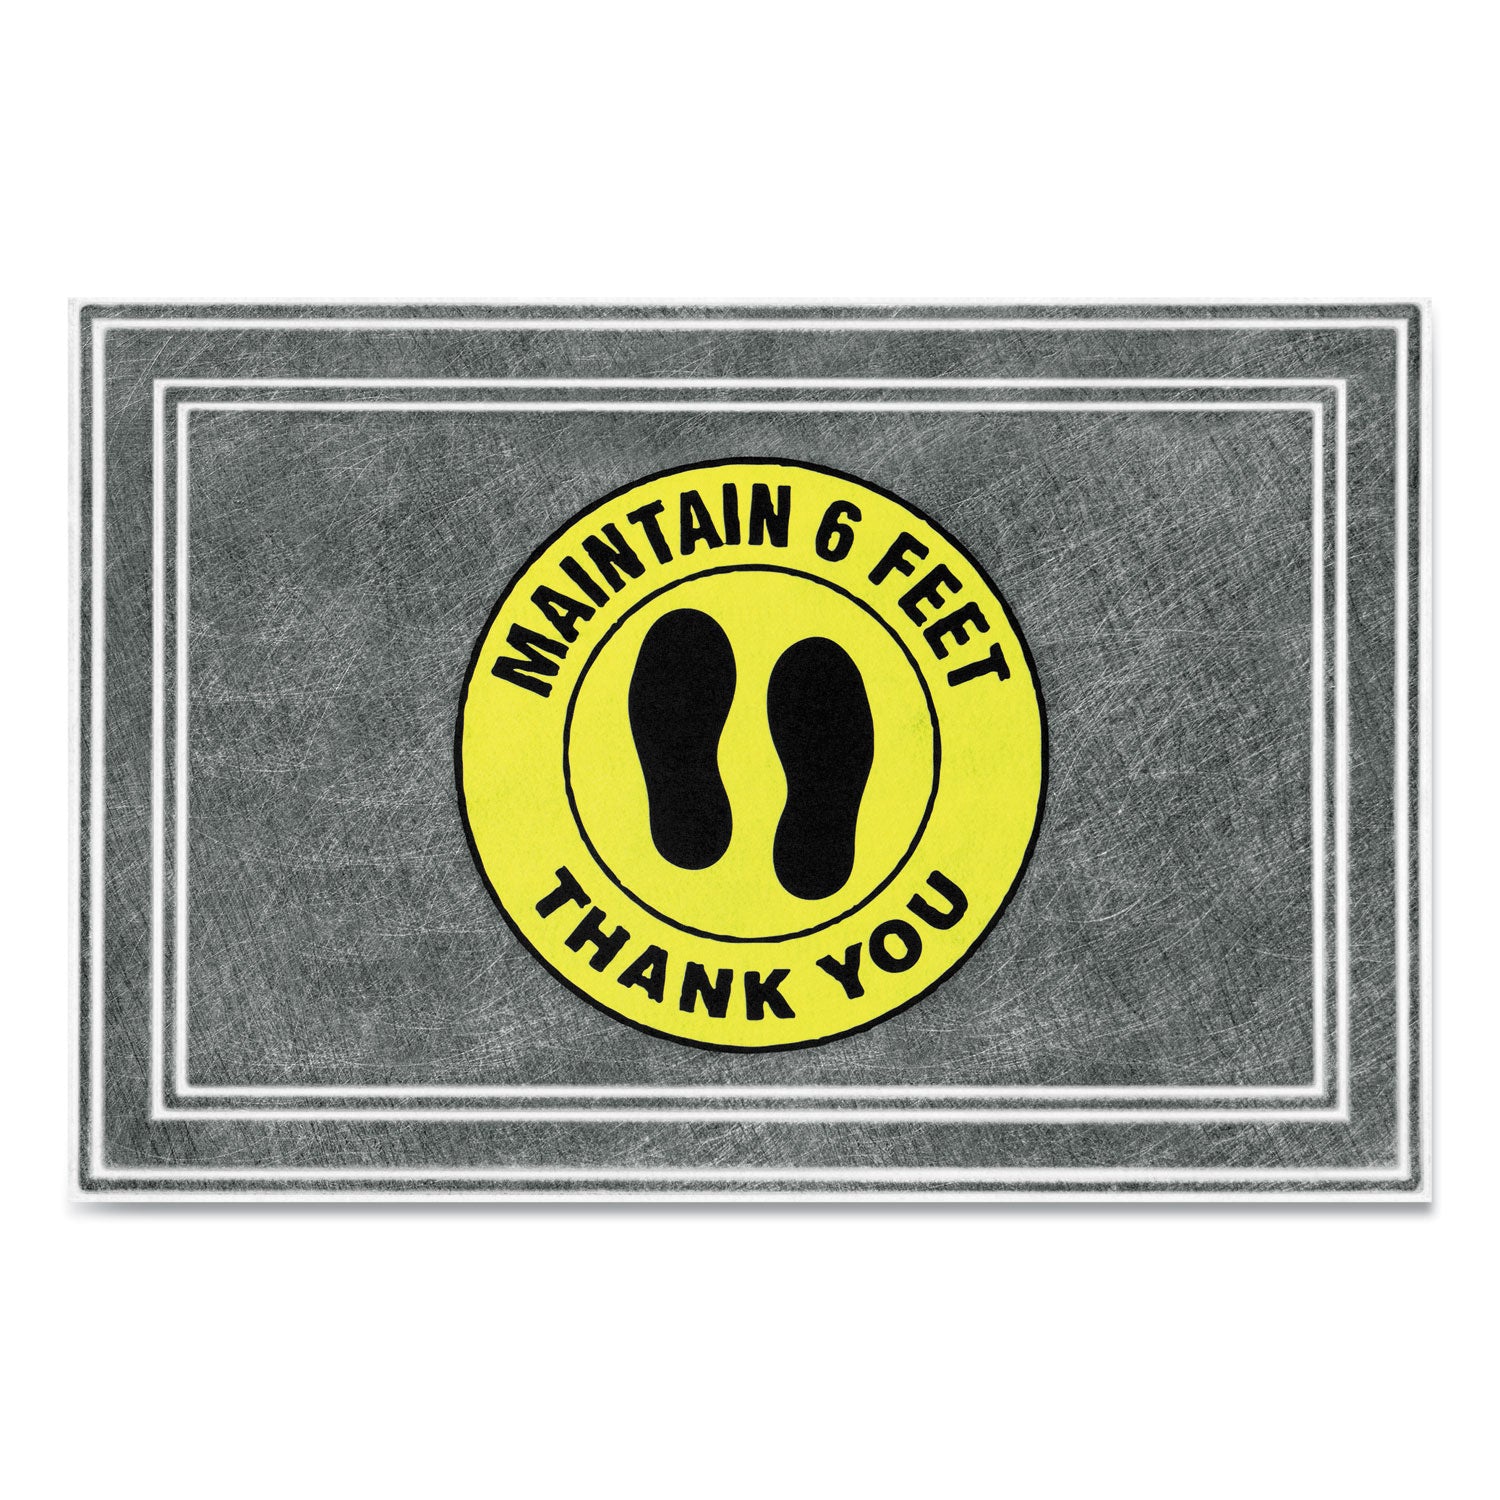 message-floor-mats-24-x-36-charcoal-yellow-maintain-6-feet-thank-you_aph3984528802x3 - 1